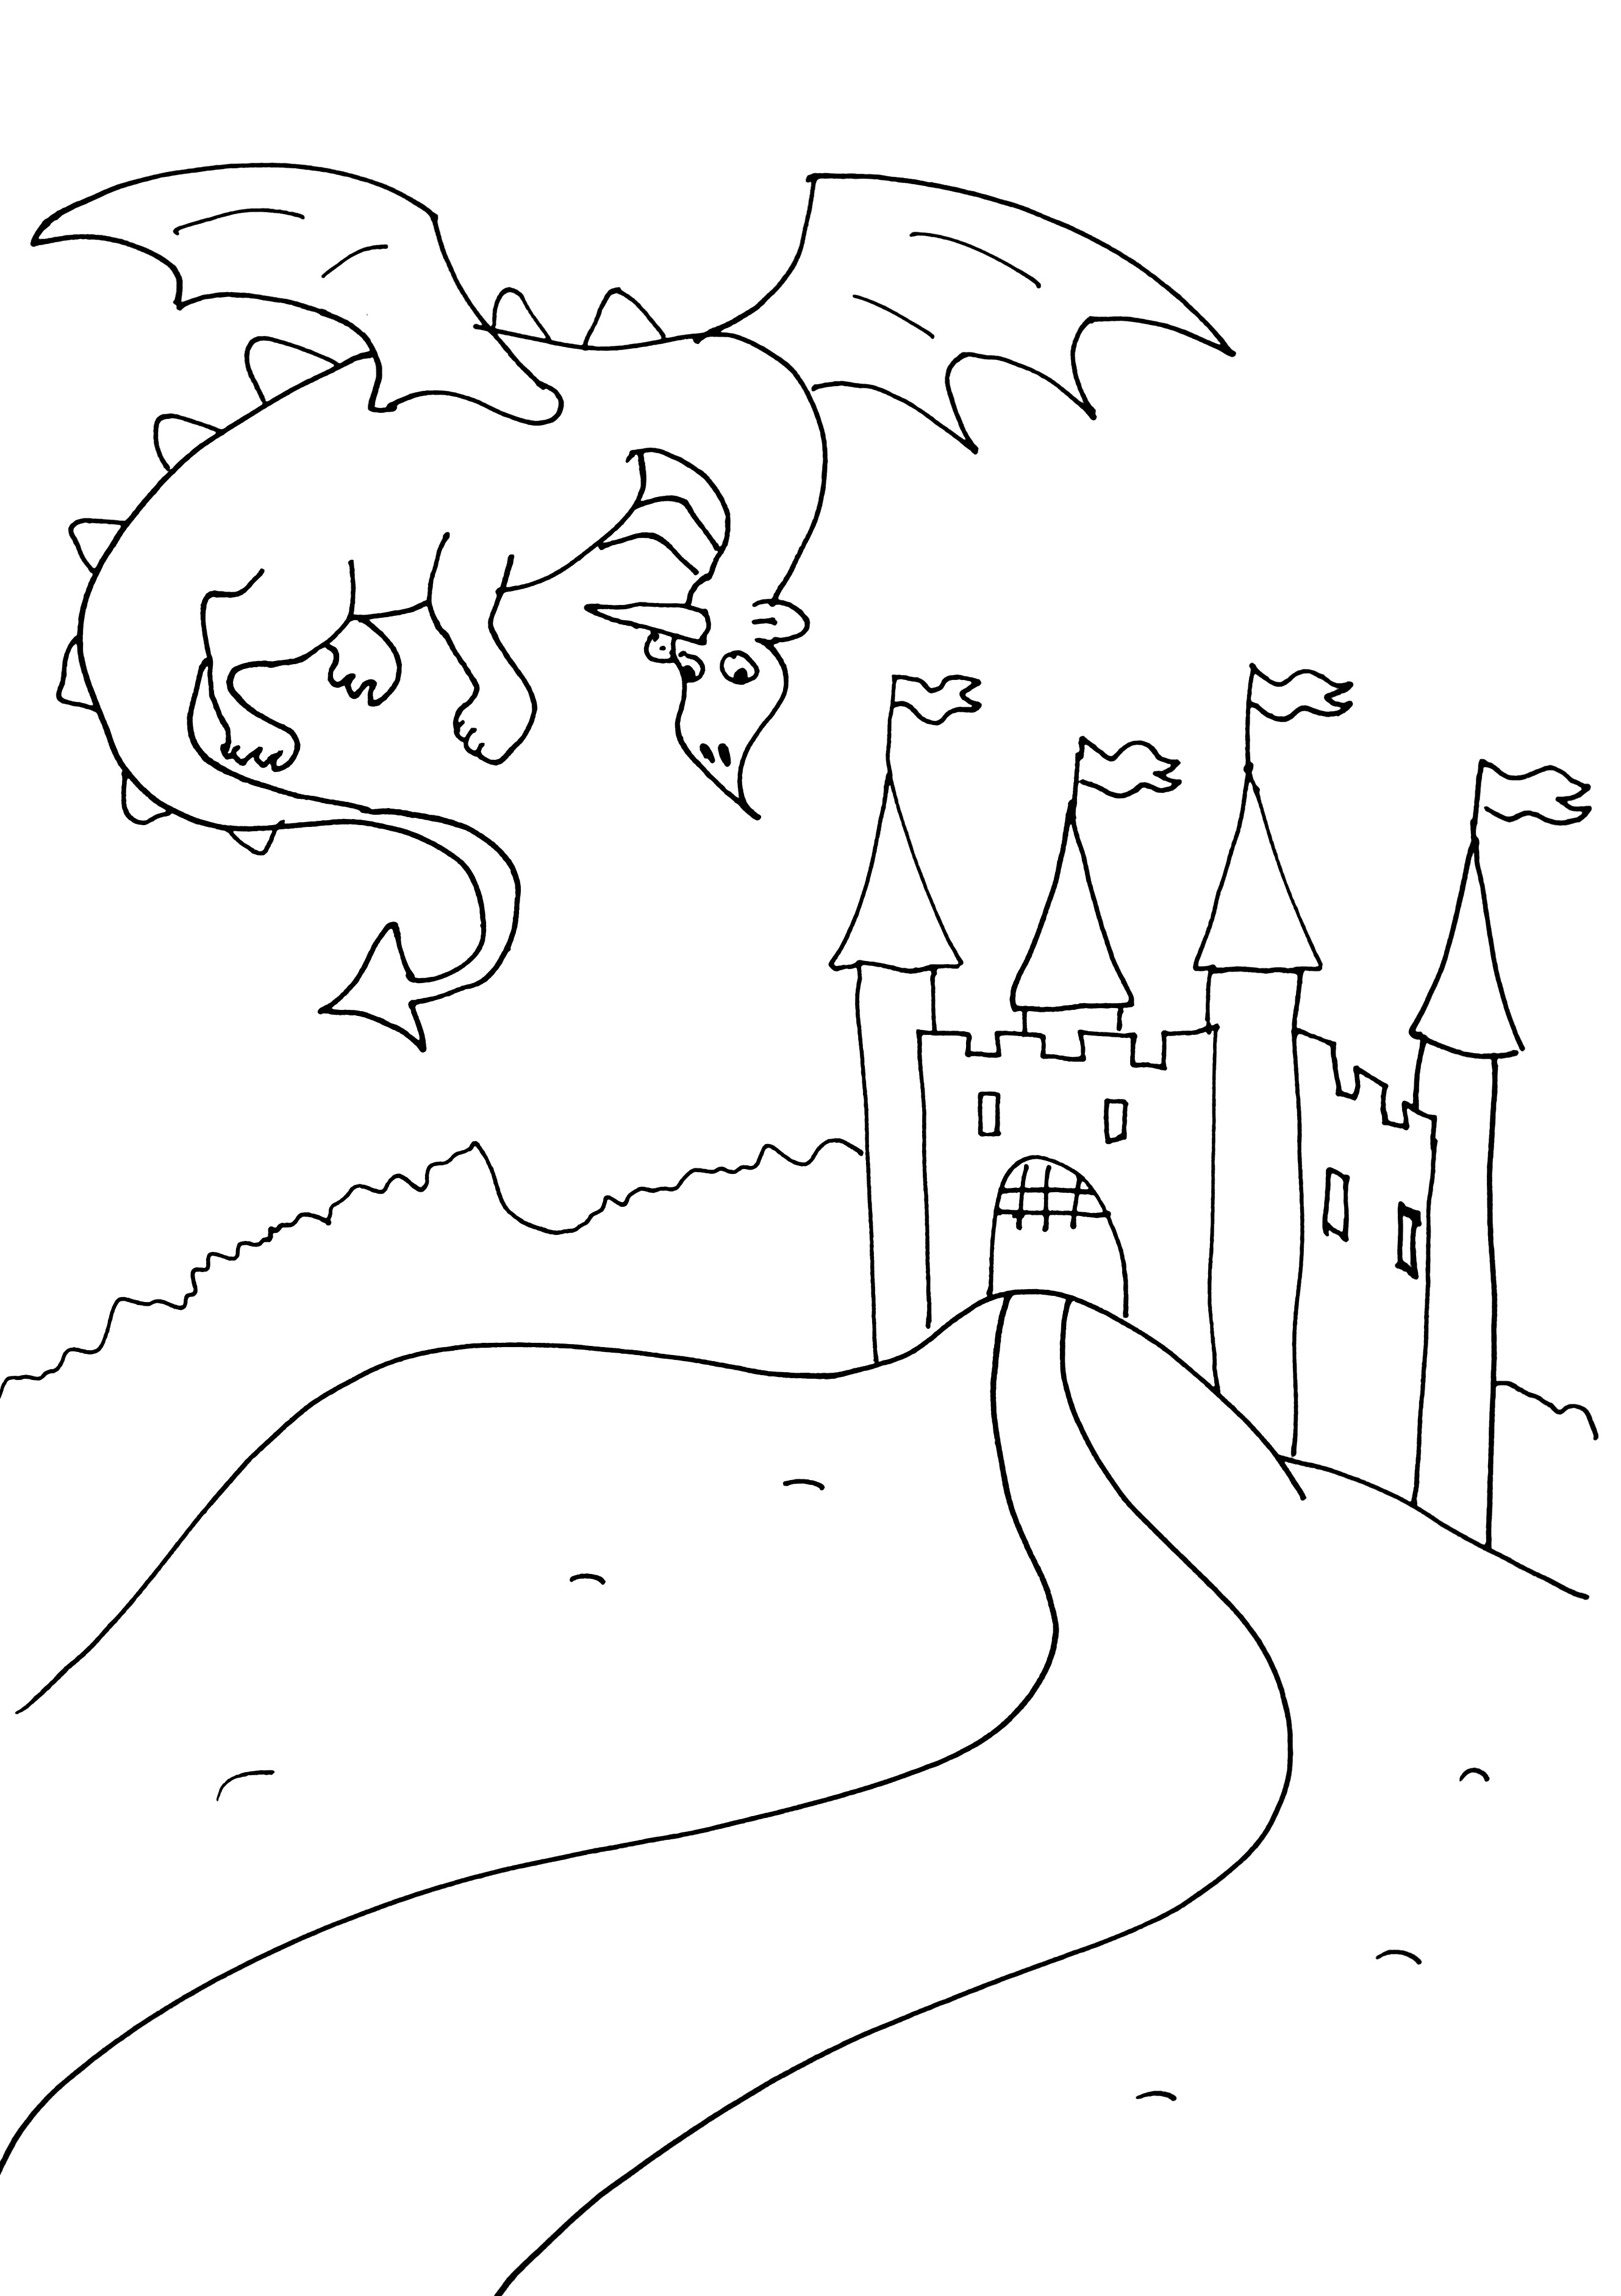 image=chevaliers et dragons coloriage chevaliers dragons 4 1